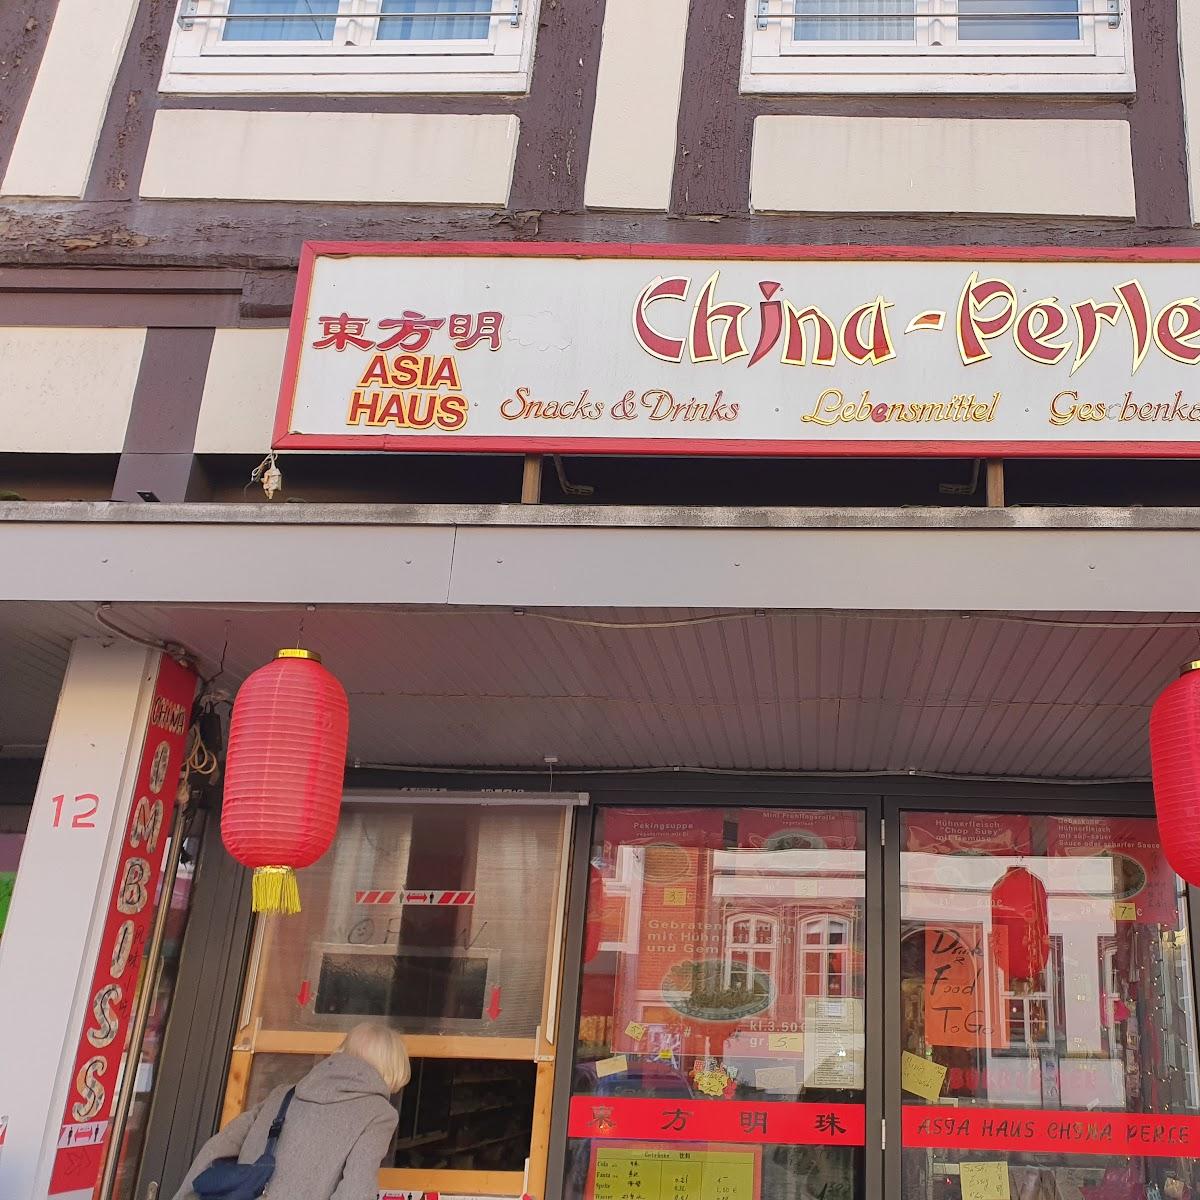 Restaurant "Asia Haus China-Perle" in Gifhorn